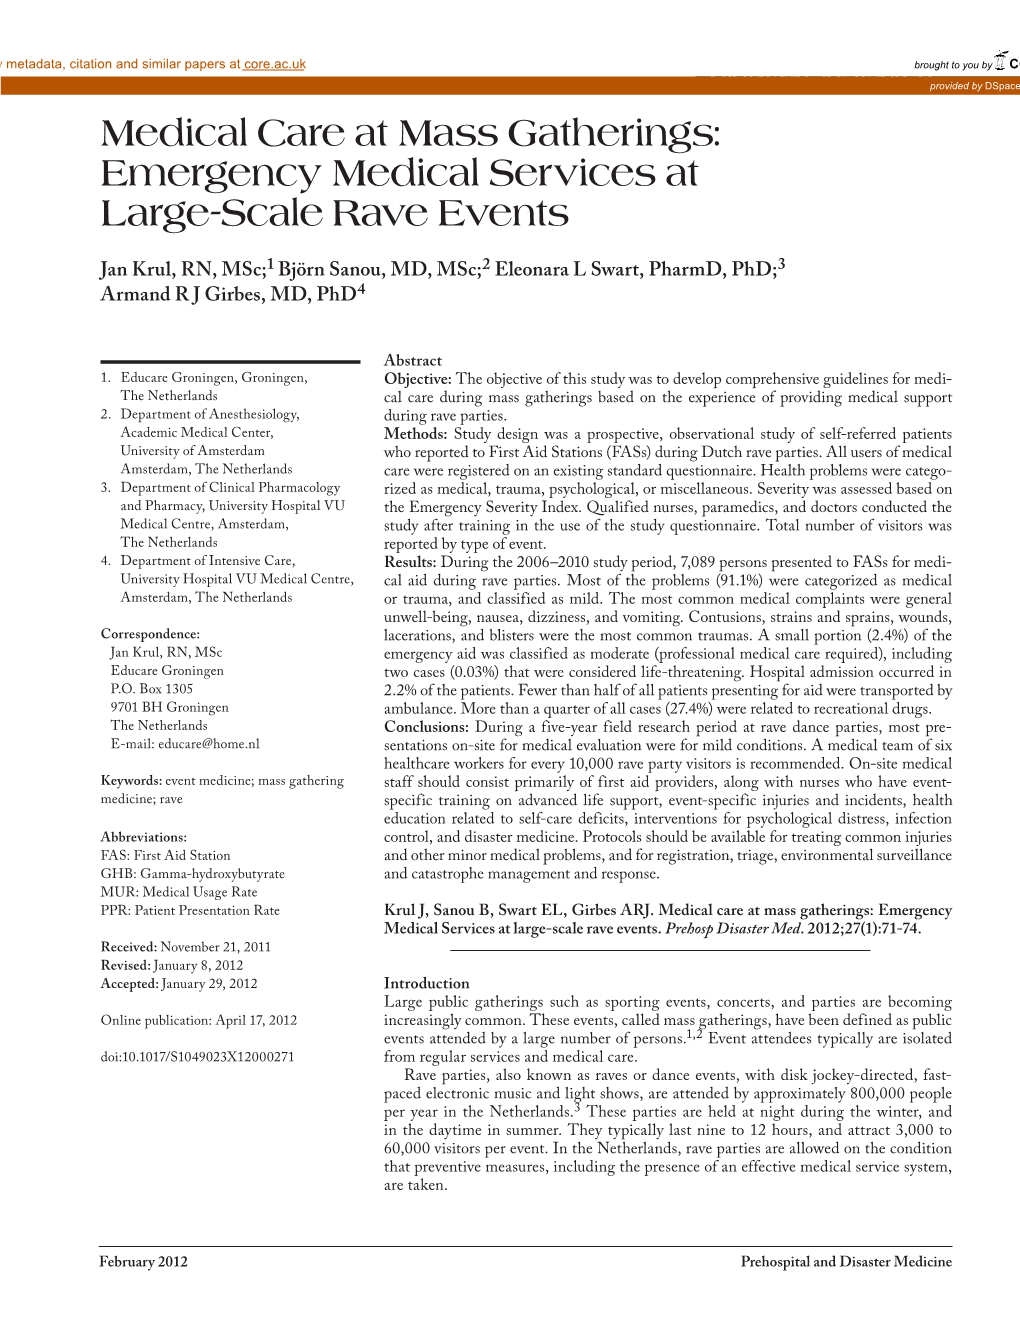 Medical Care at Mass Gatherings: Emergency Medical Services at Large-Scale Rave Events